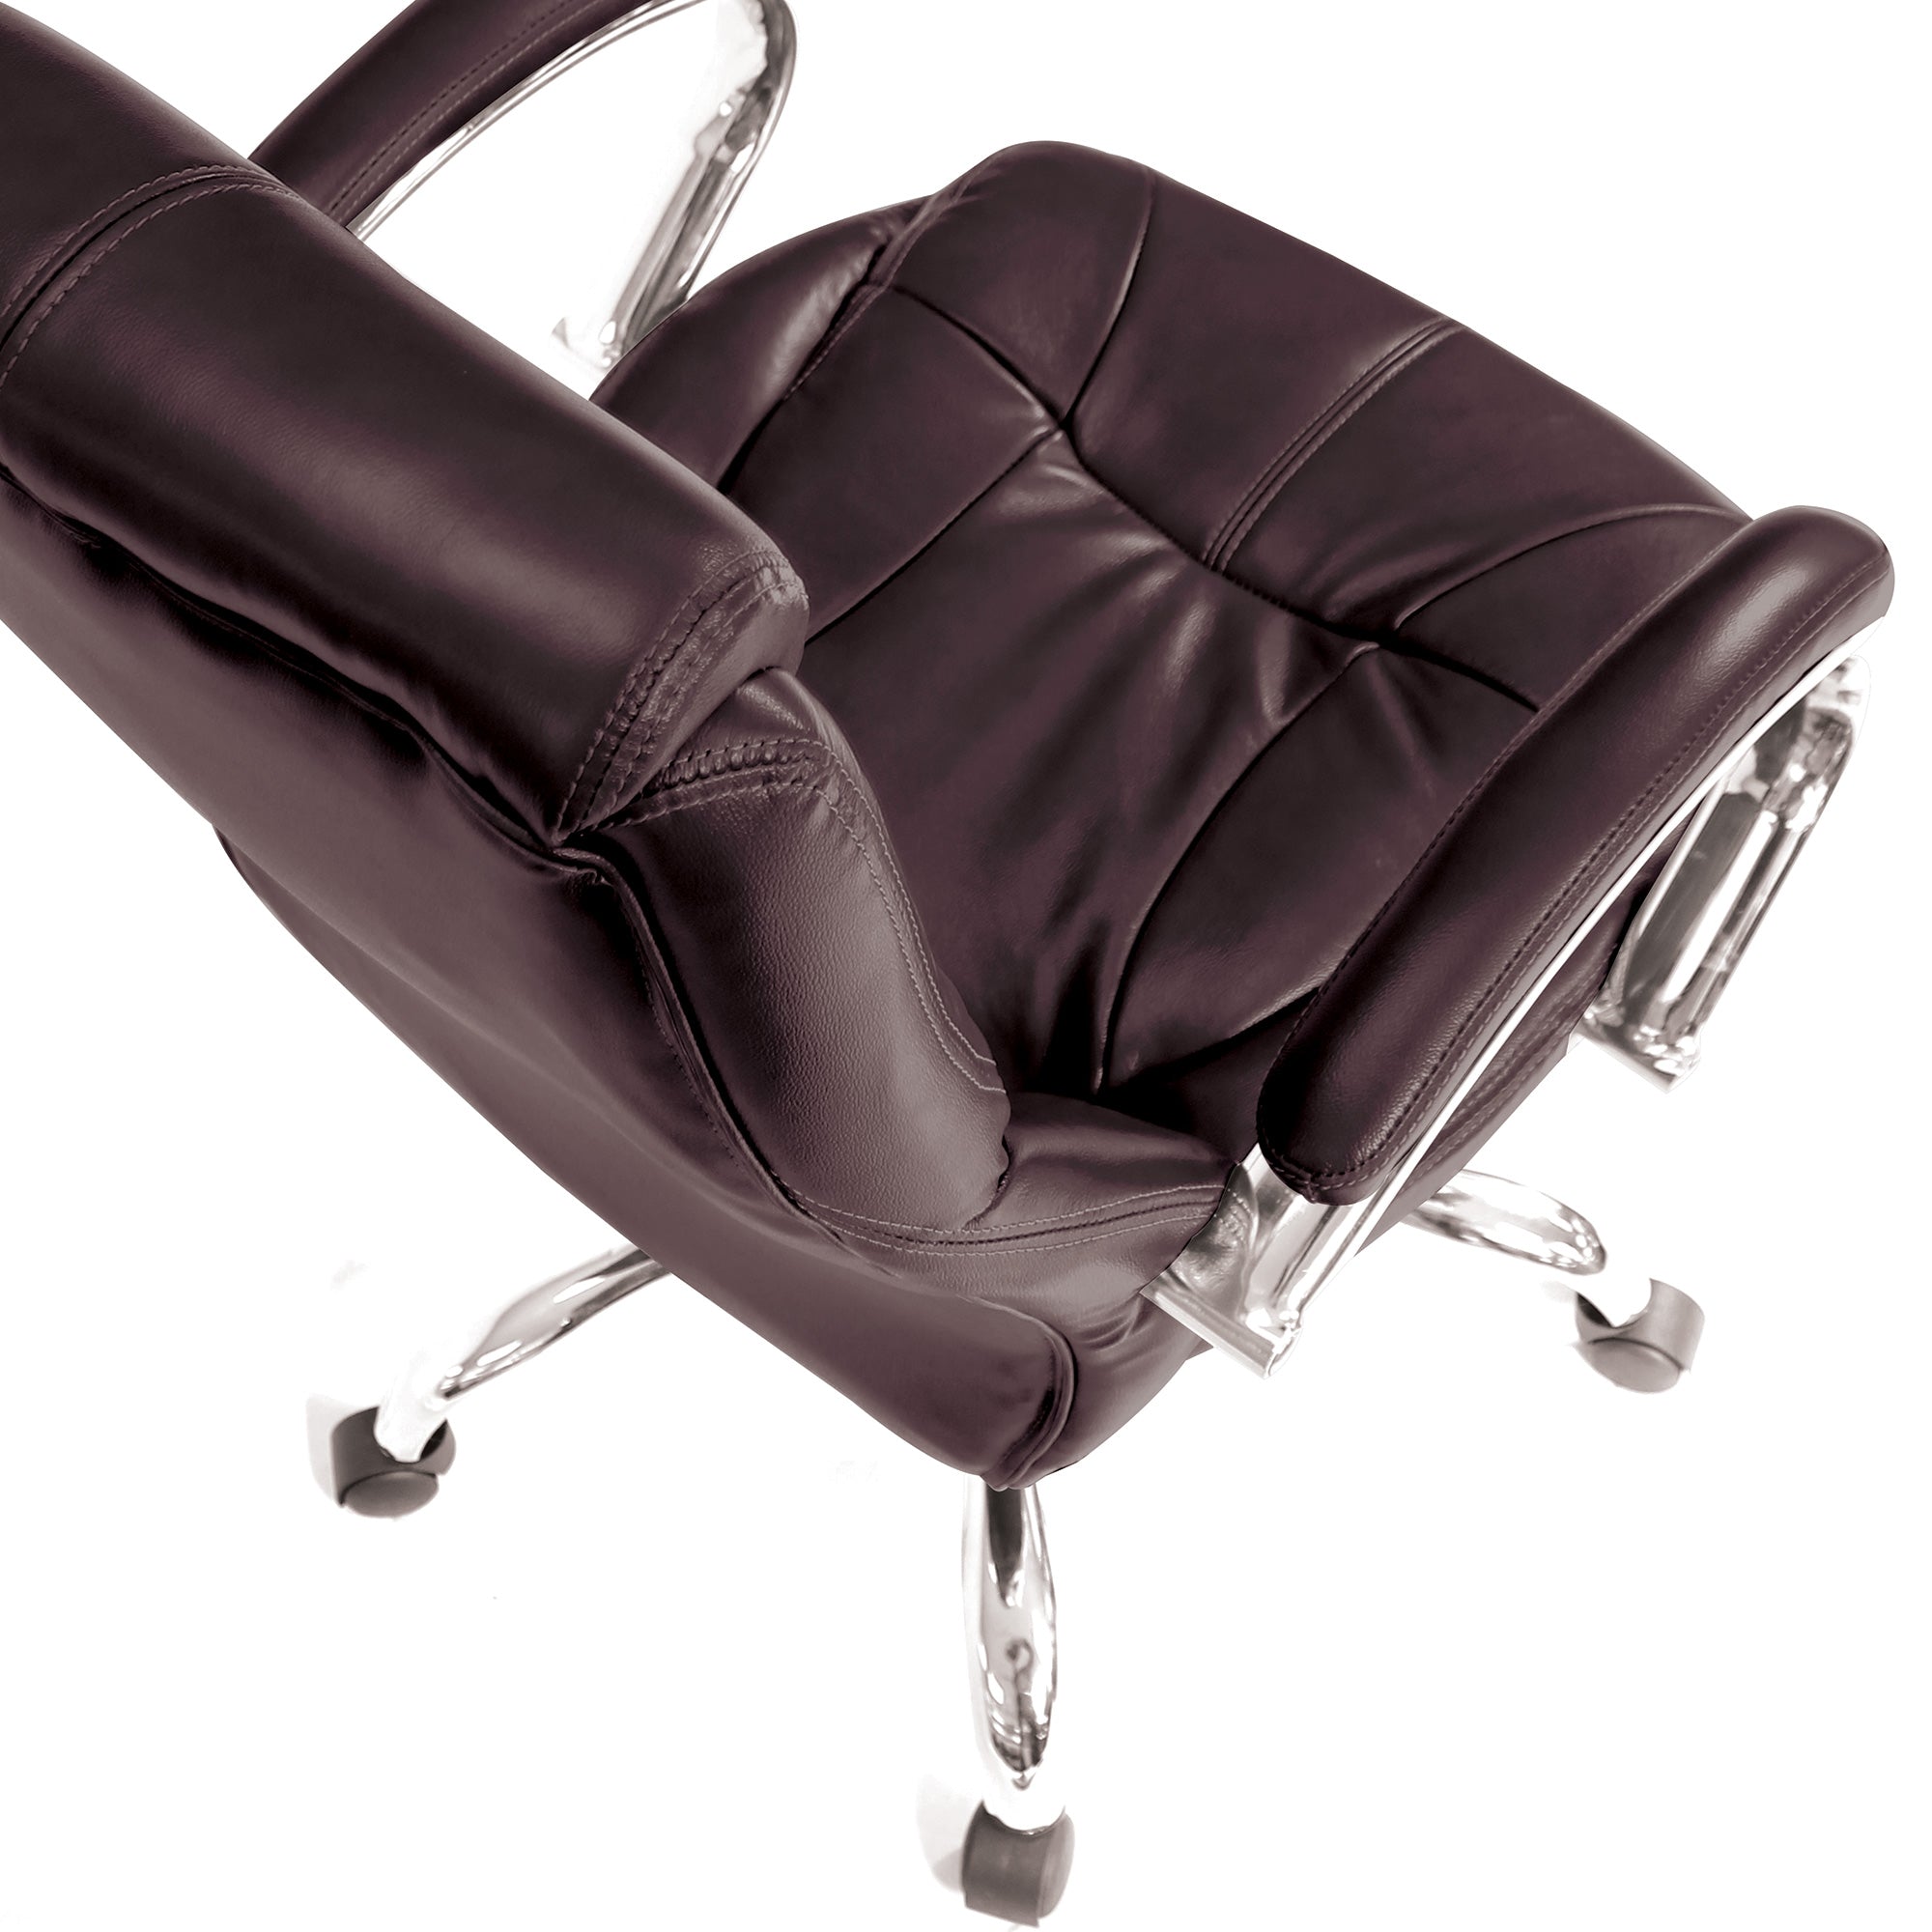 Sandown – High Back Luxurious Leather Faced Executive Visitor Armchair with Integral headrest and Chrome Base